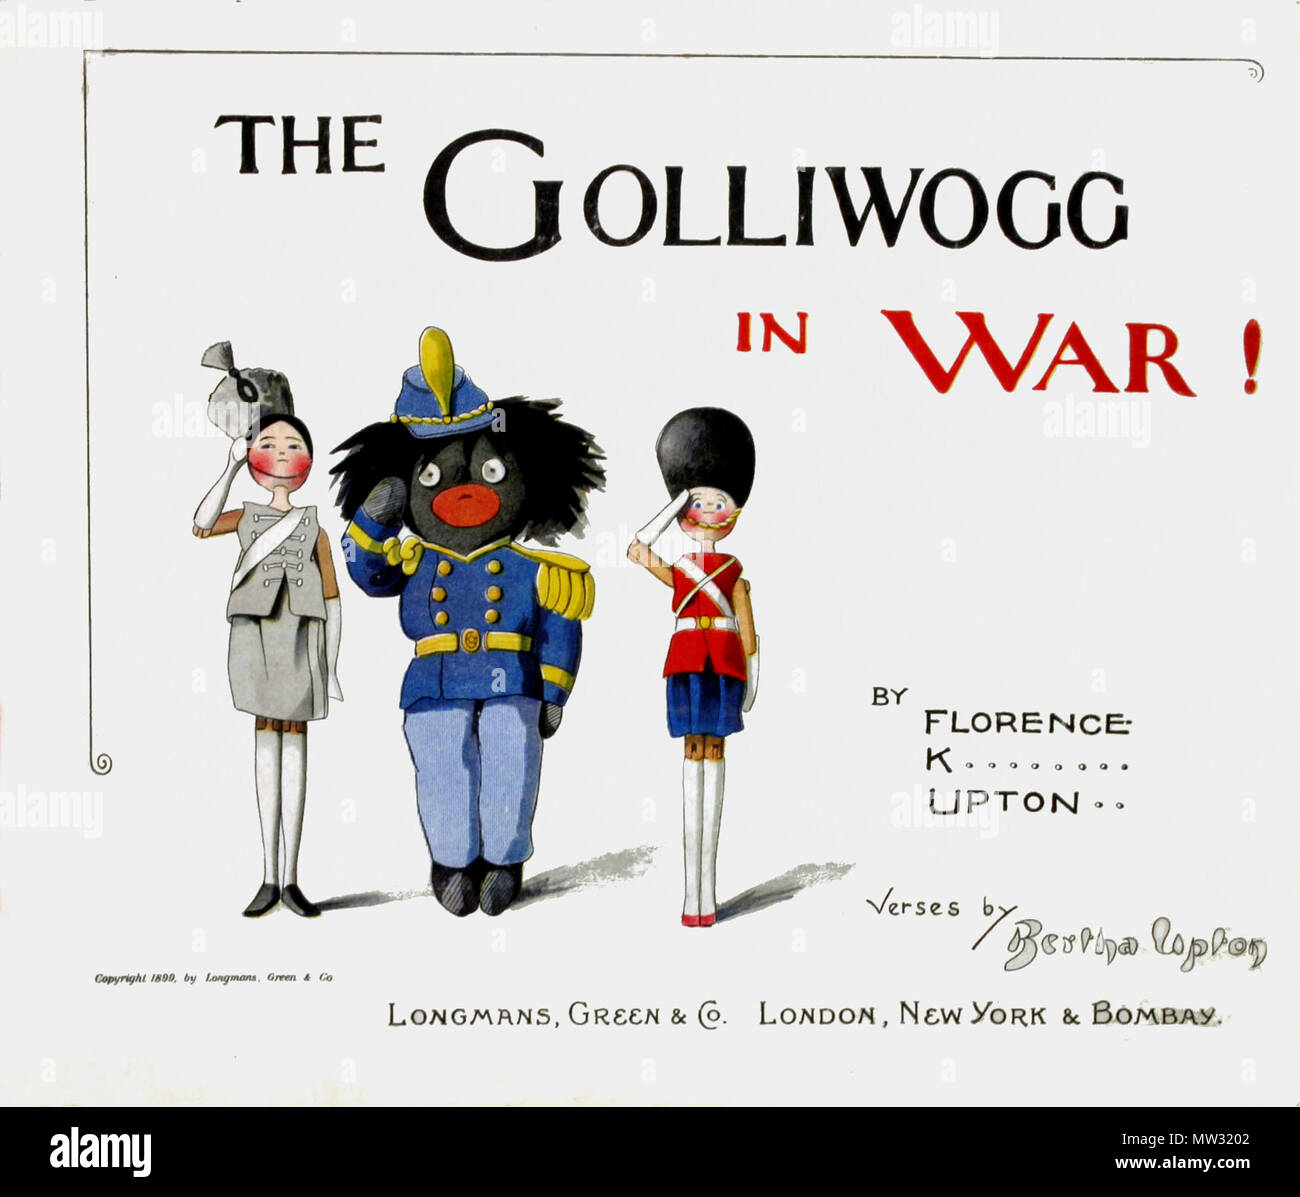 595 The Golliwog in War! cover Stock Photo